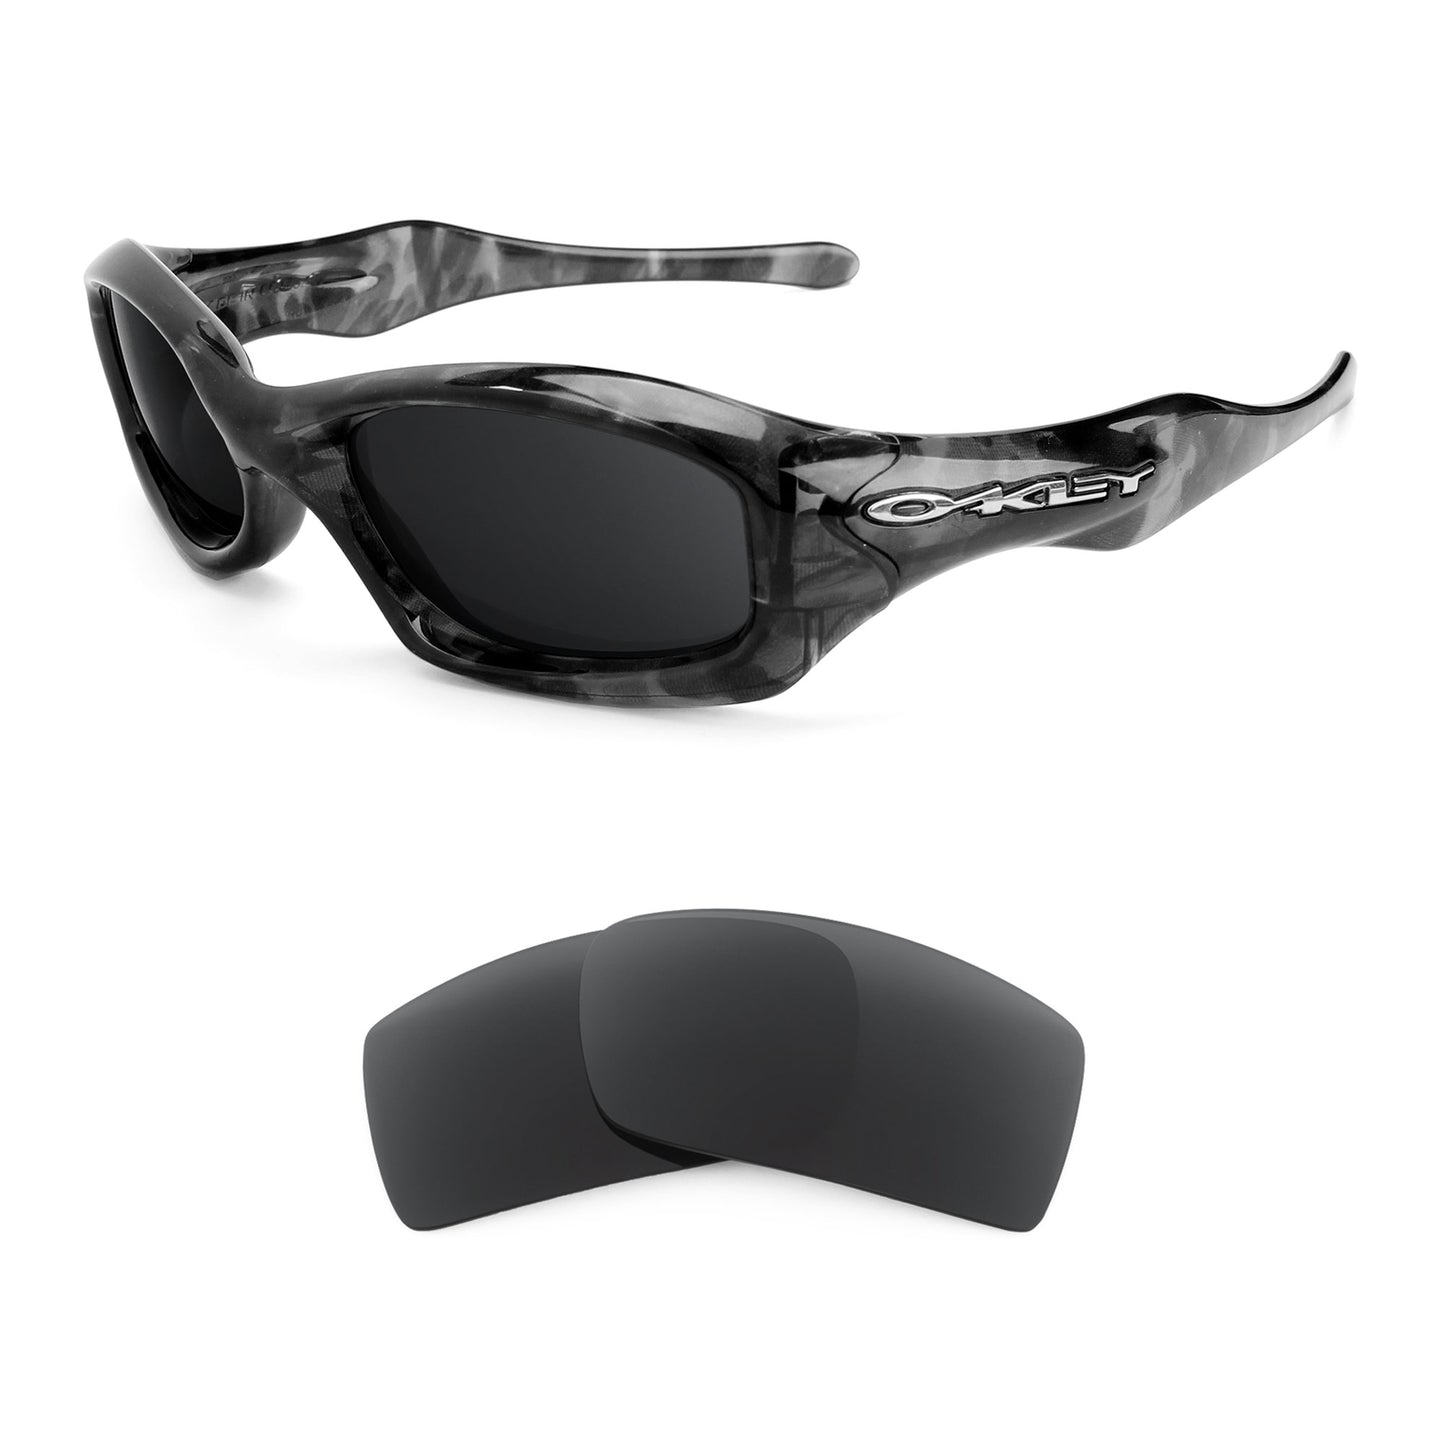 Oakley Fat Cat sunglasses with replacement lenses